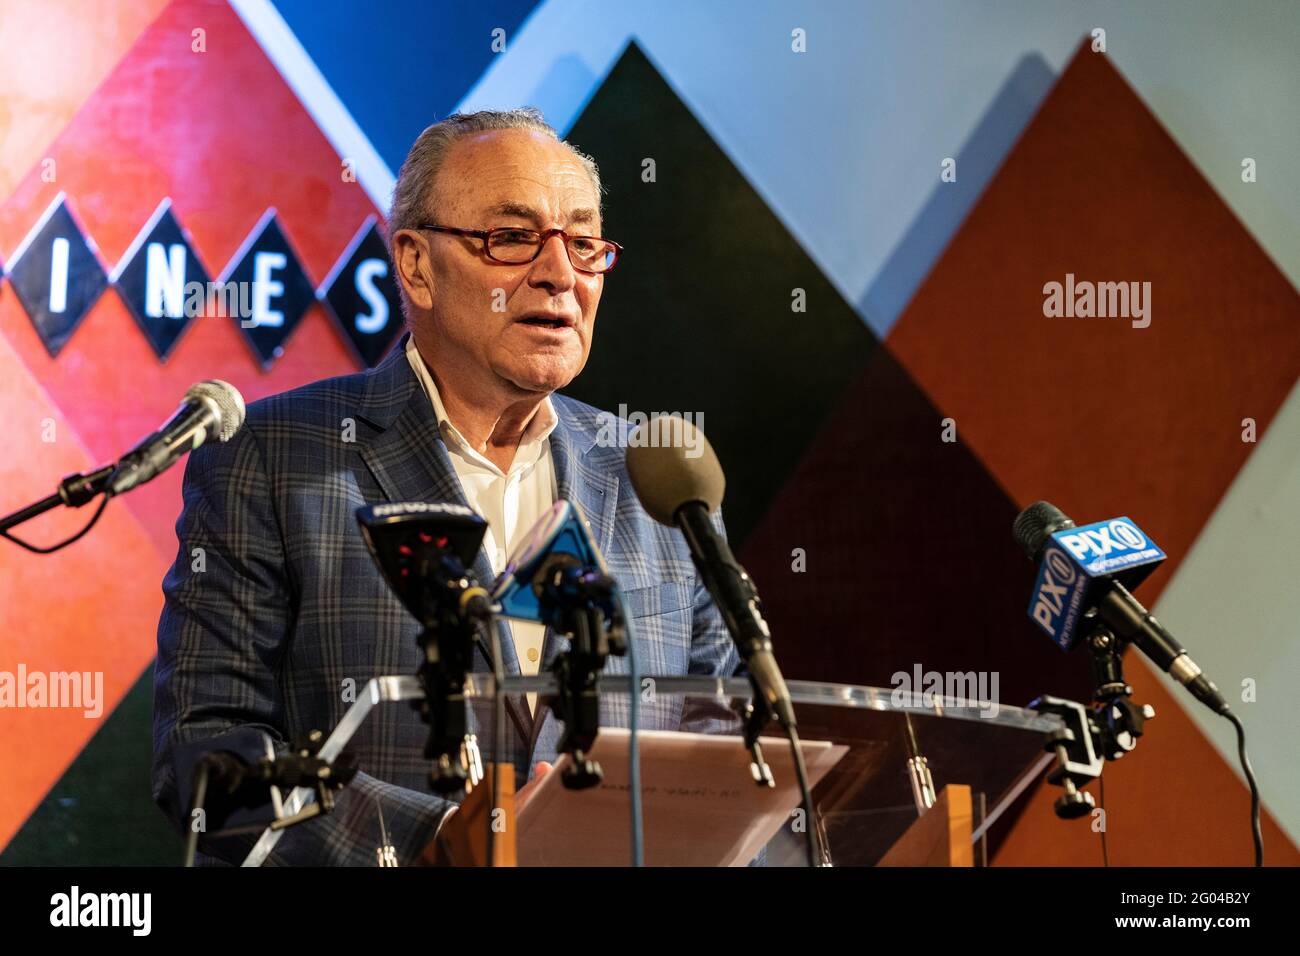 New York, NY - May 31, 2021: U. S. Senator Charles Schumer speaks at Carolines on Broadway comedy club re-opening after pandemic ceremony Stock Photo